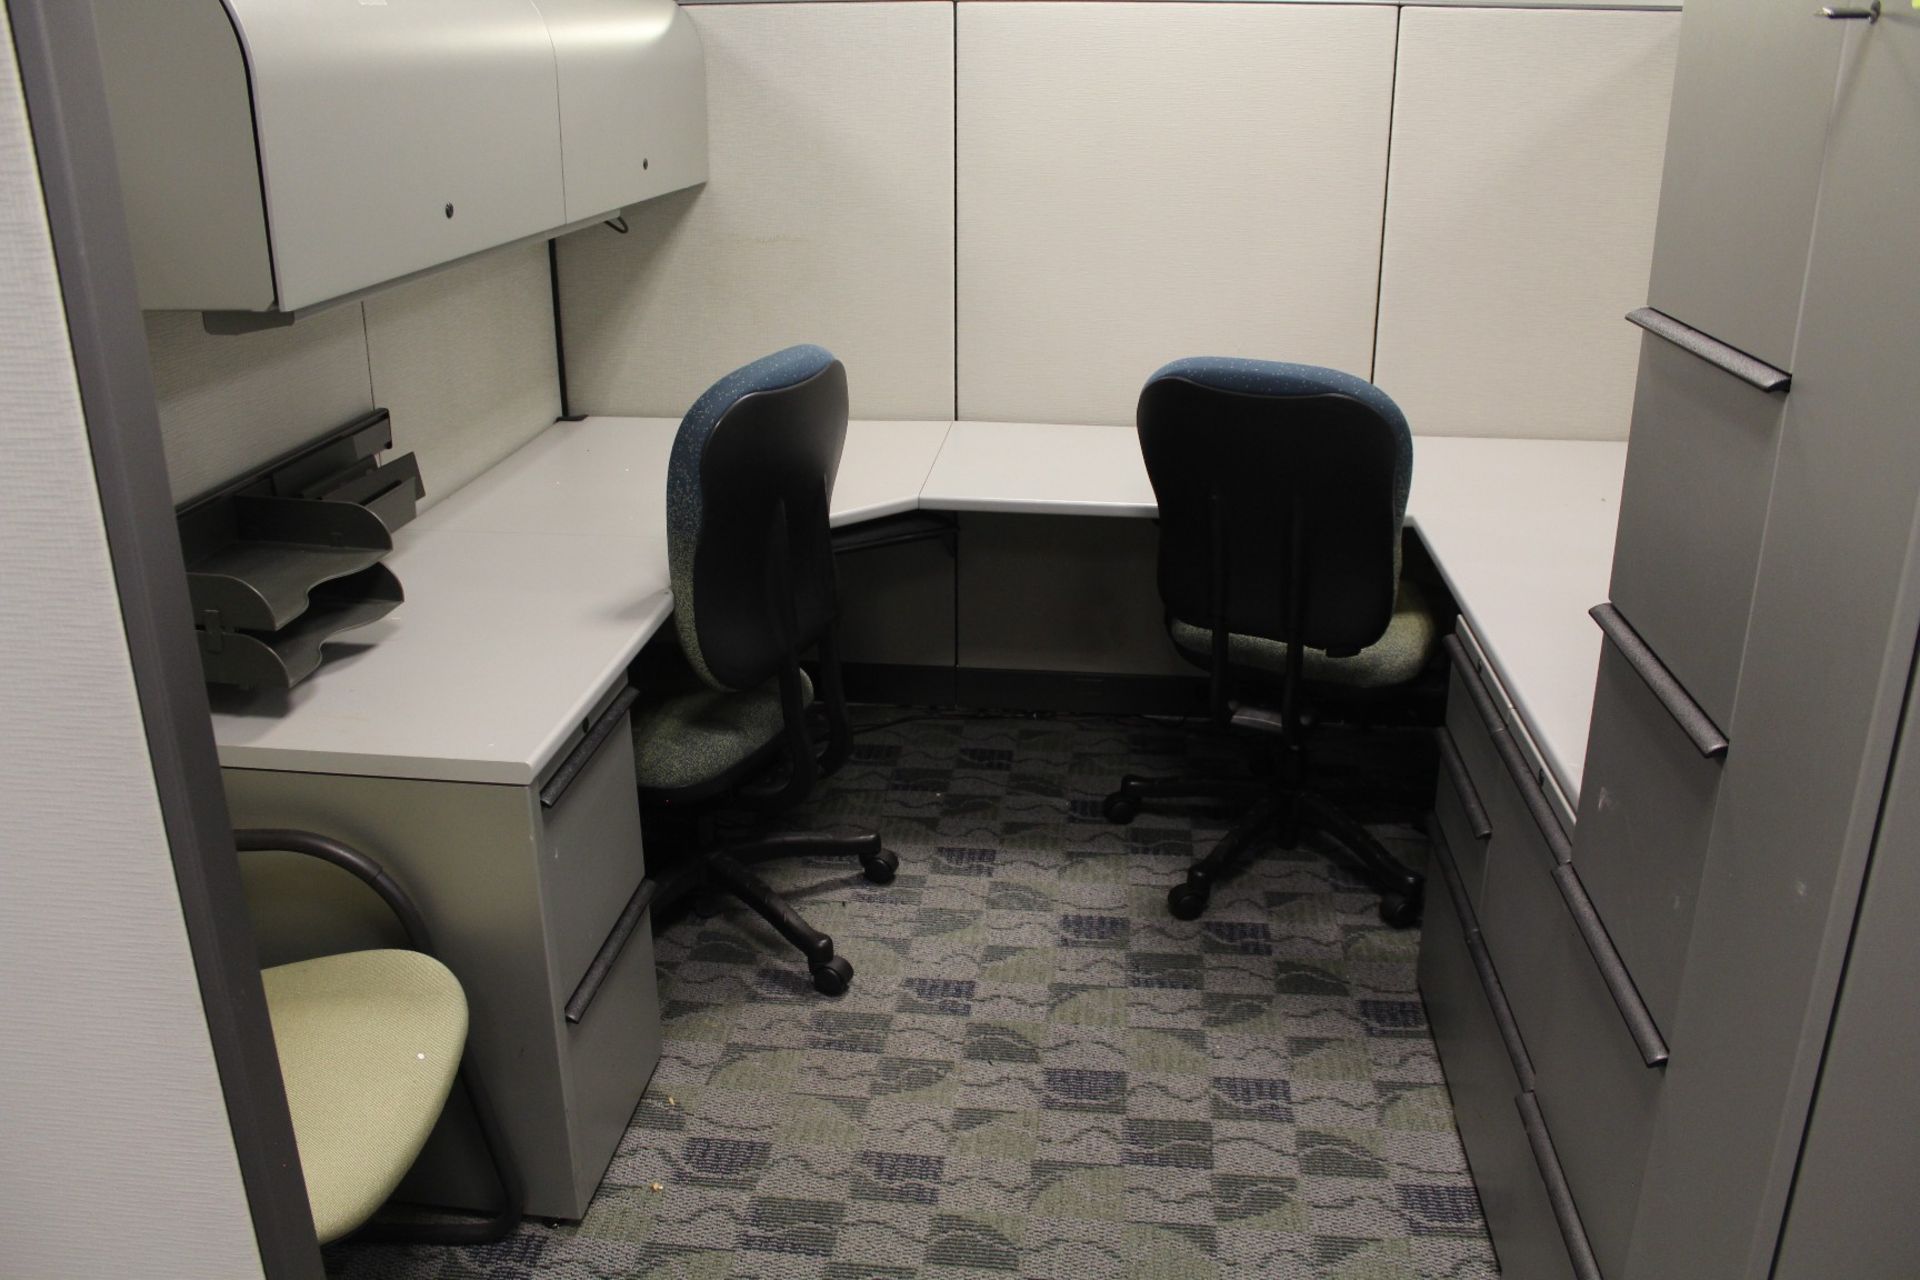 Cubicle Office System, W/ (3) Work Stations, Chairs, File Cabinets, Storage Cabinets & Cubicle Walls - Bild 3 aus 5